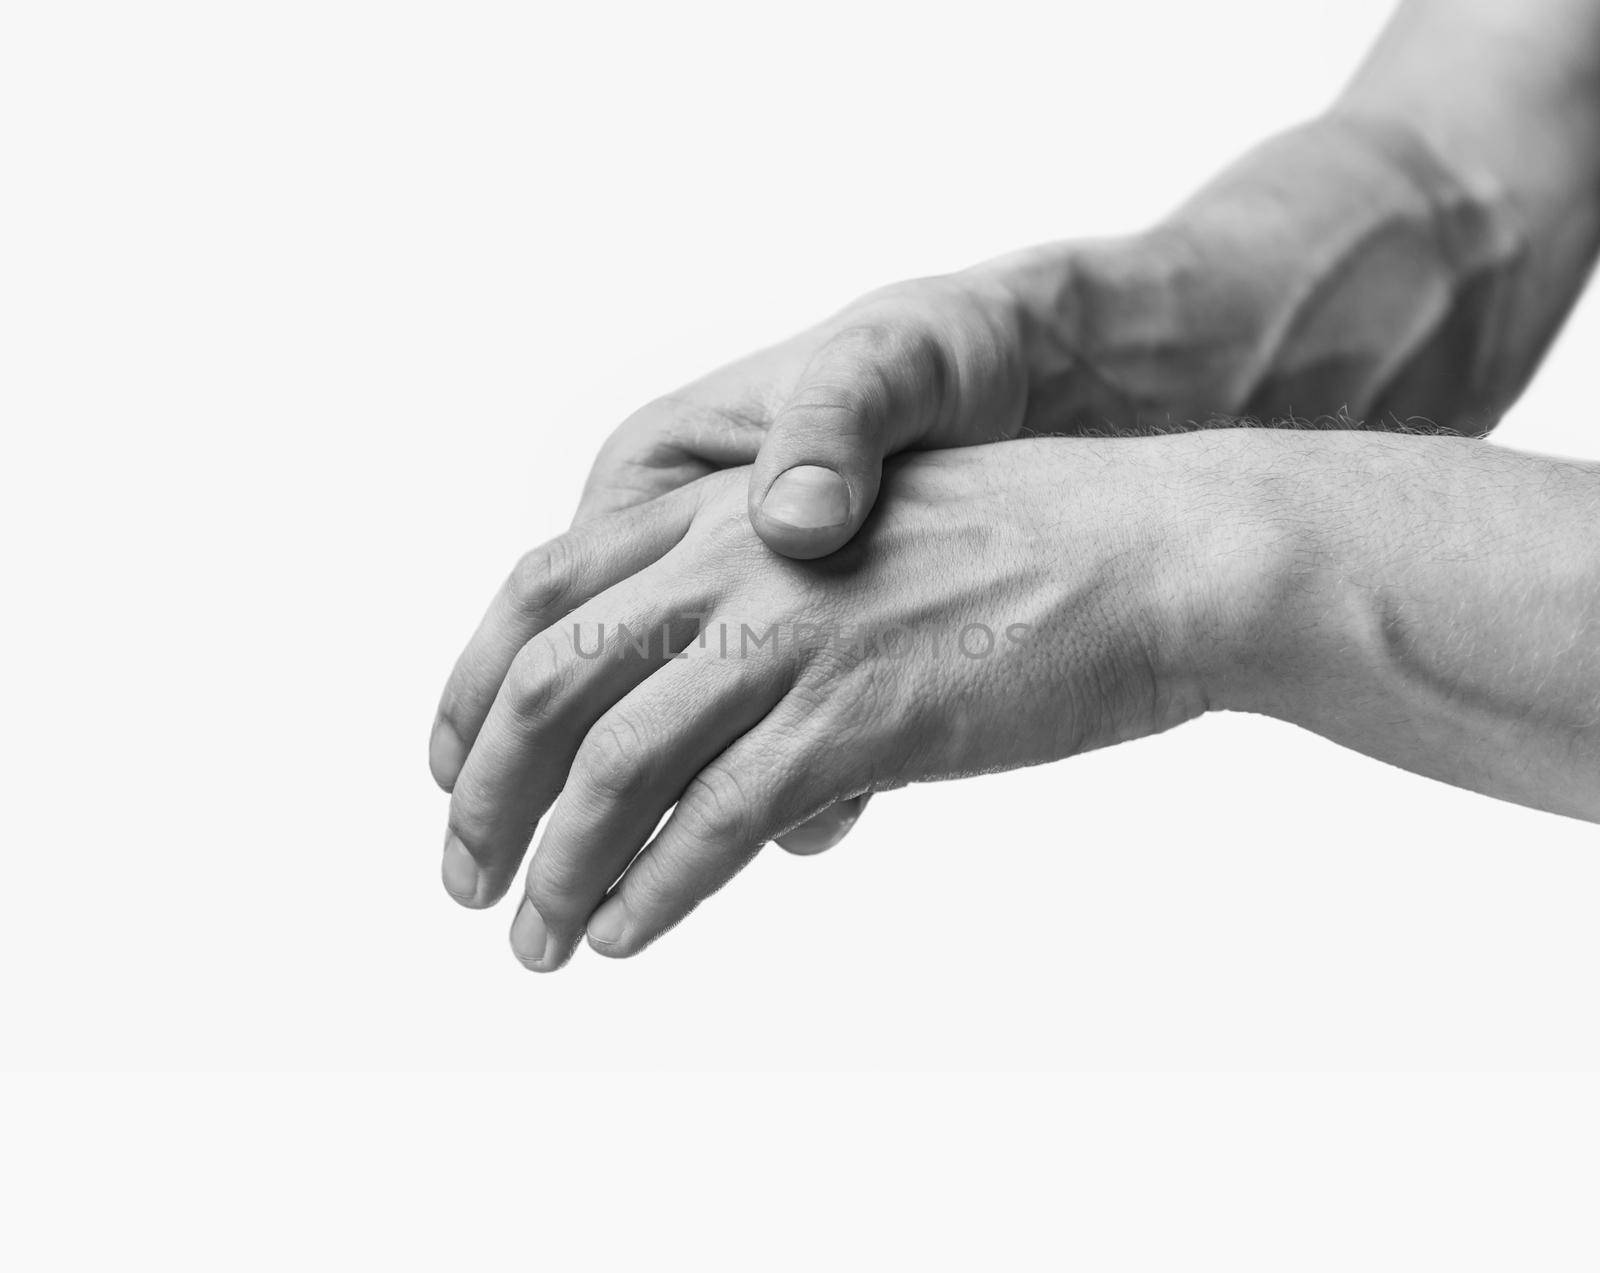 Pain in a male hand. Man holds his hand. Monochrome image, isolated on a white background